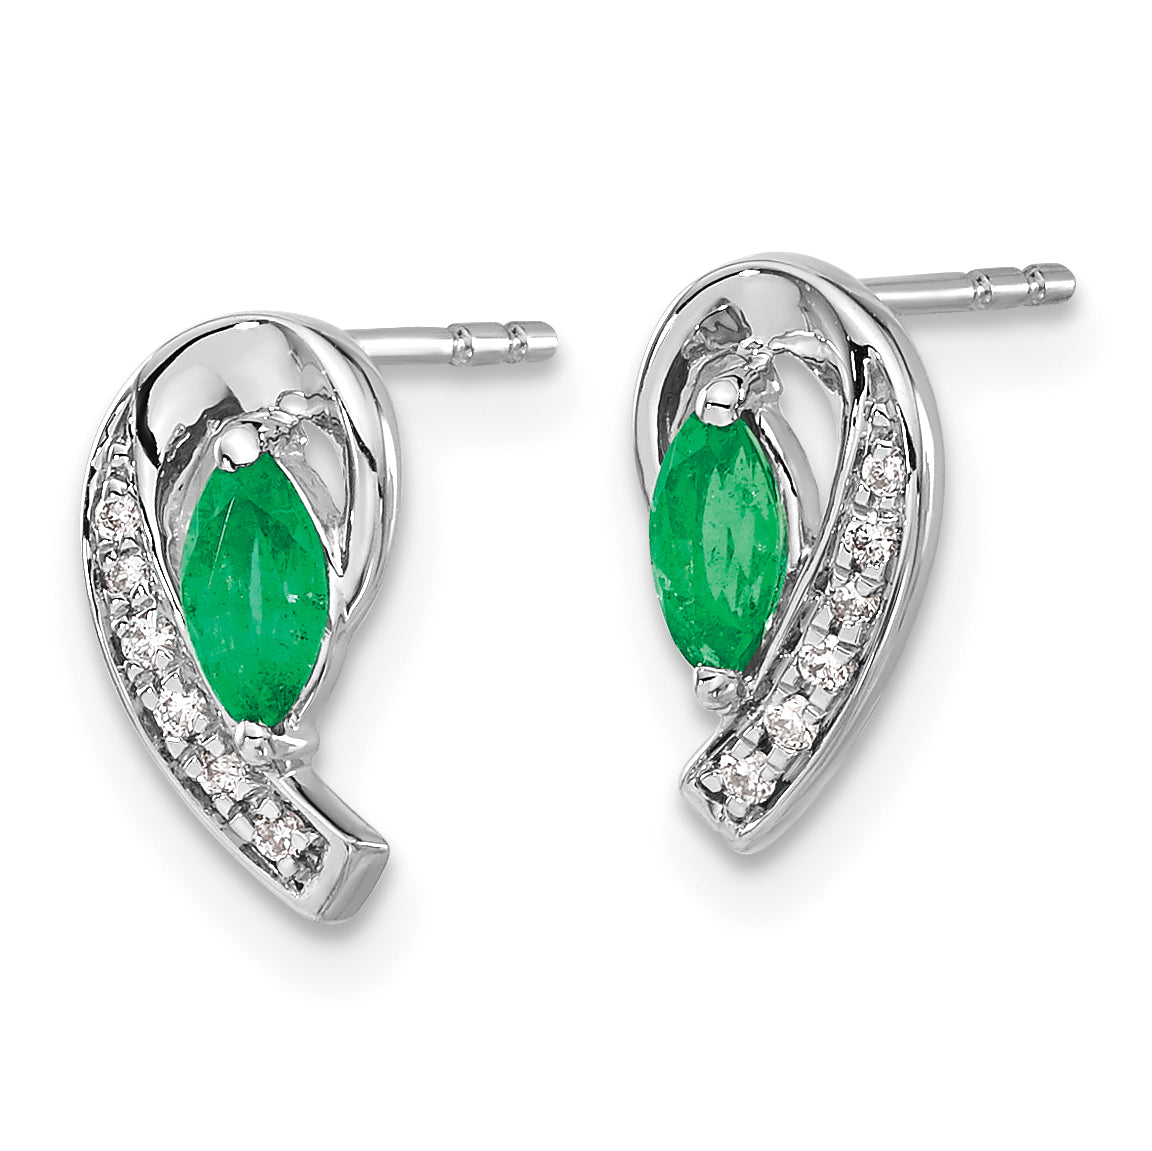 10k White Gold 1/20Ct Diamond and Emerald Earrings